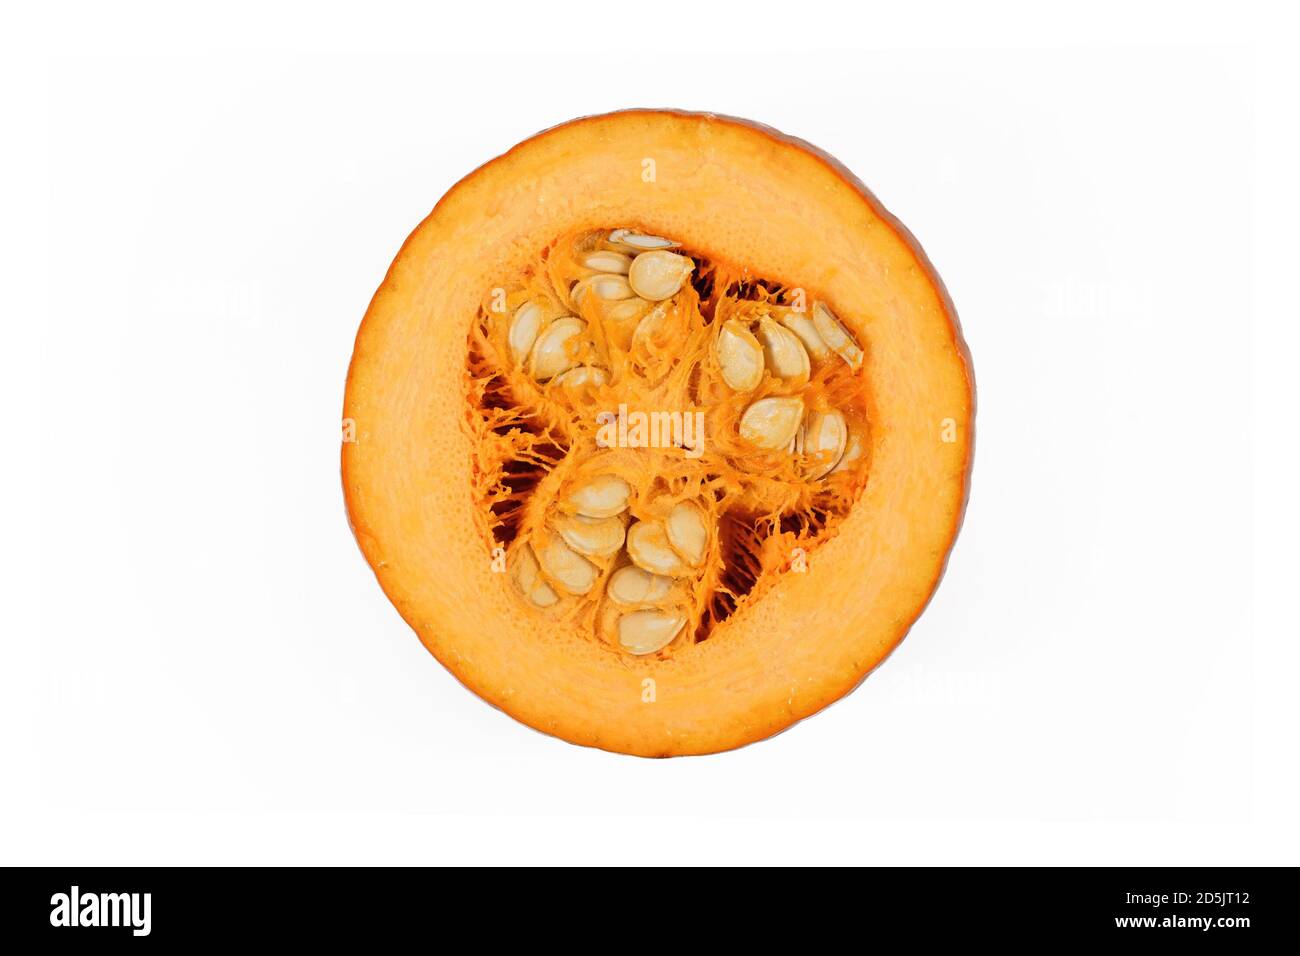 Open 'Baby Bear' Halloween pumpkin showing vegetable meat and seeds inside. Isolated on white background Stock Photo